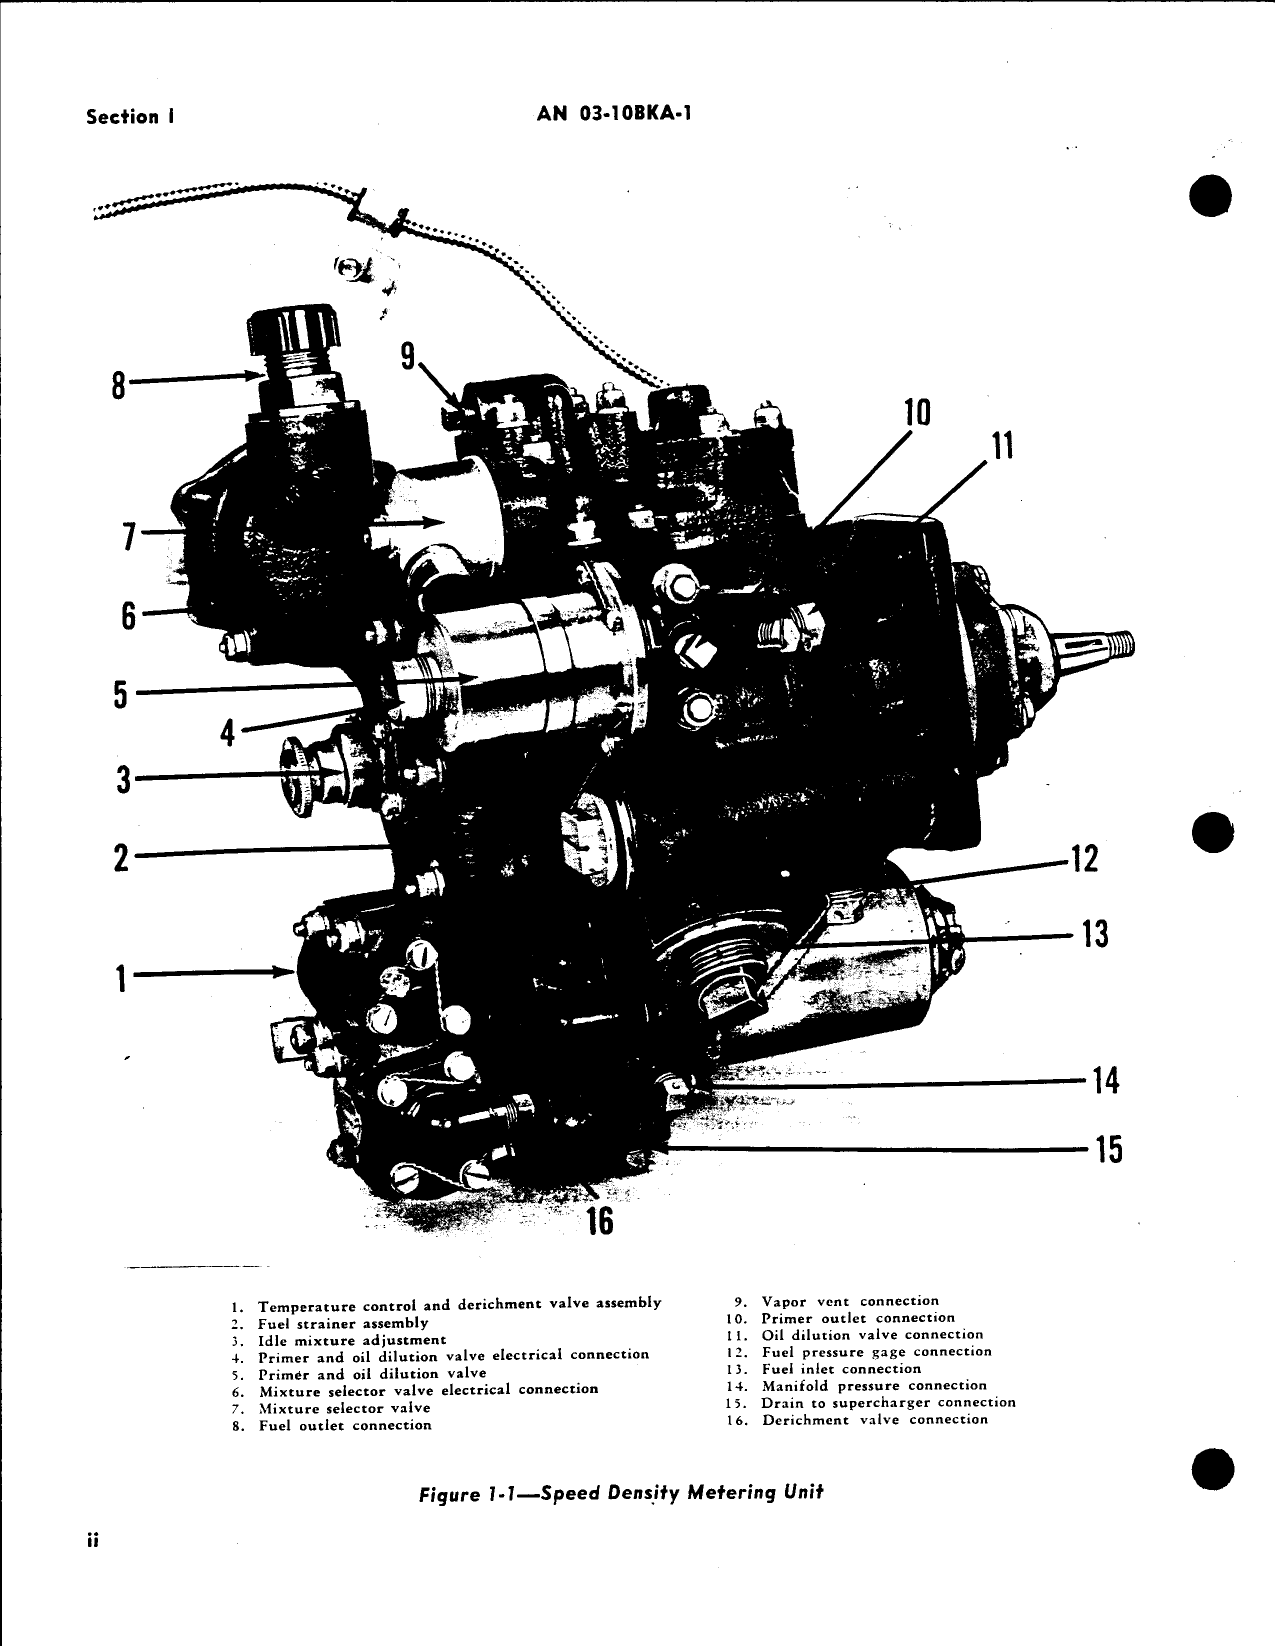 Sample page 4 from AirCorps Library document: Handbook Overhaul Instructions for Speed-Density Fuel Metering System (Bendix)